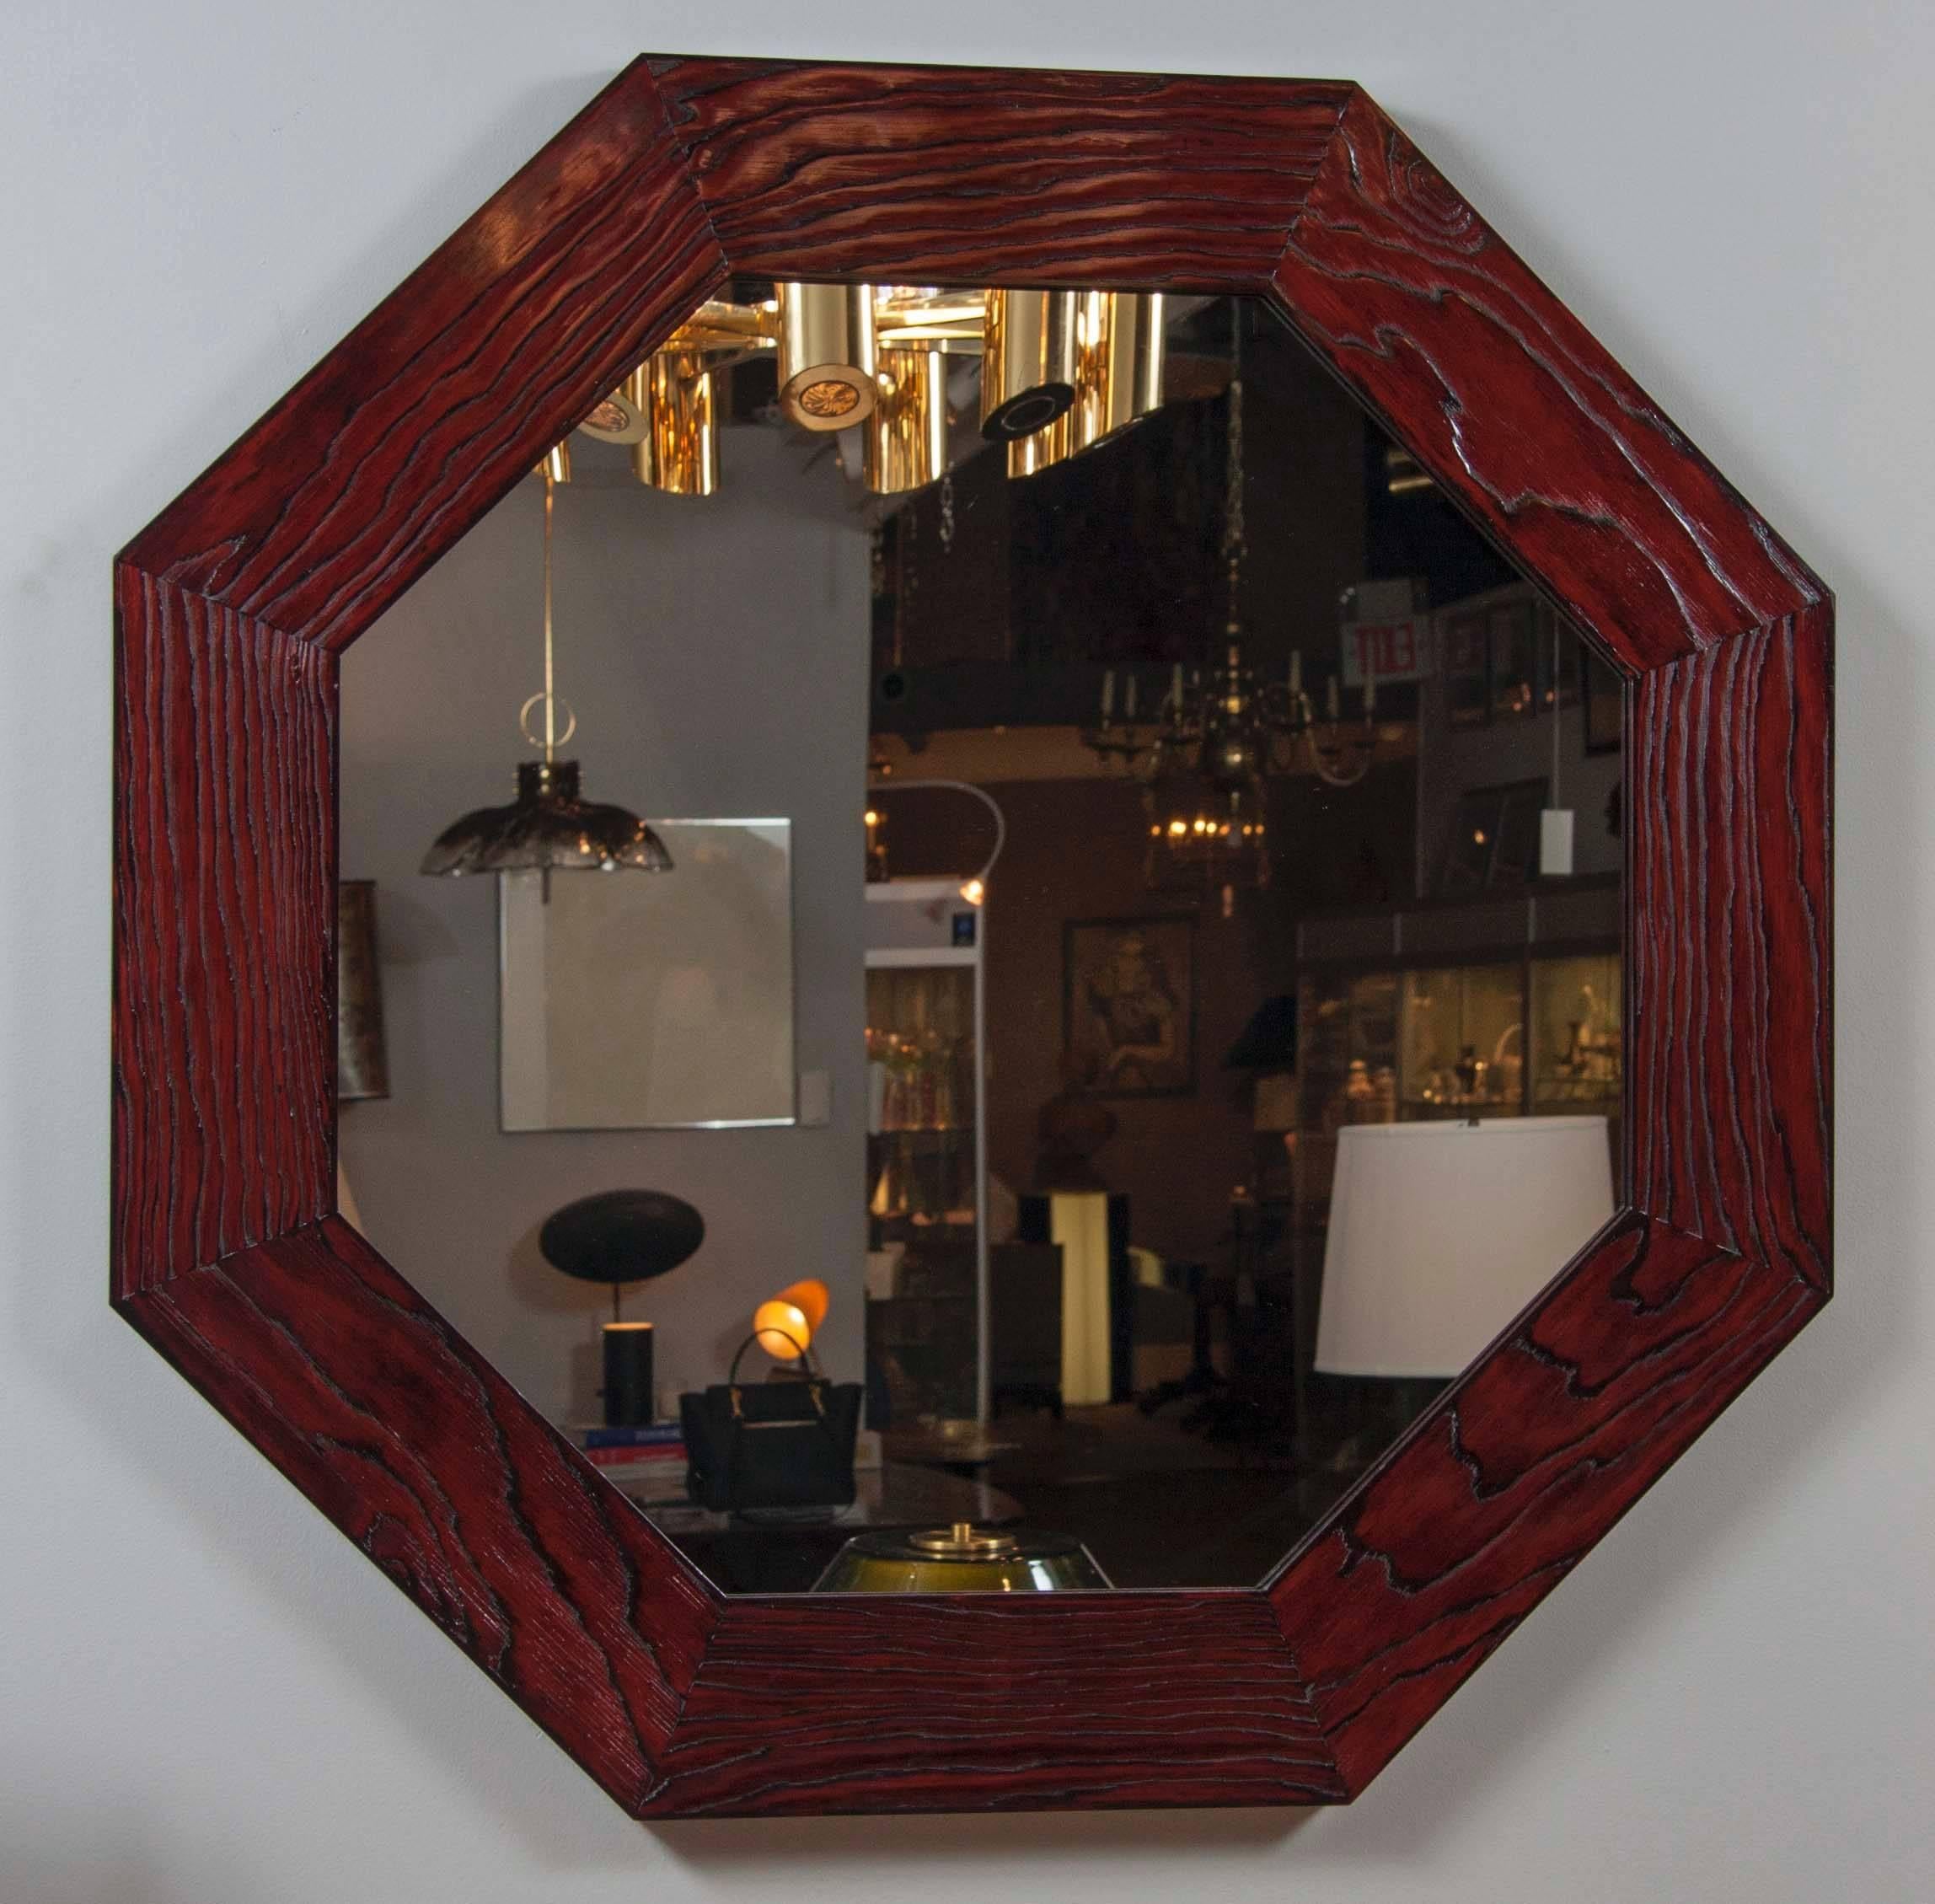 Pair of Oak octagon mirrors, wire brushed and lacquered in deep burgundy, using the technique of legend Eileen Gray. Custom colors and sizes available.
Absolutely incredible in person.